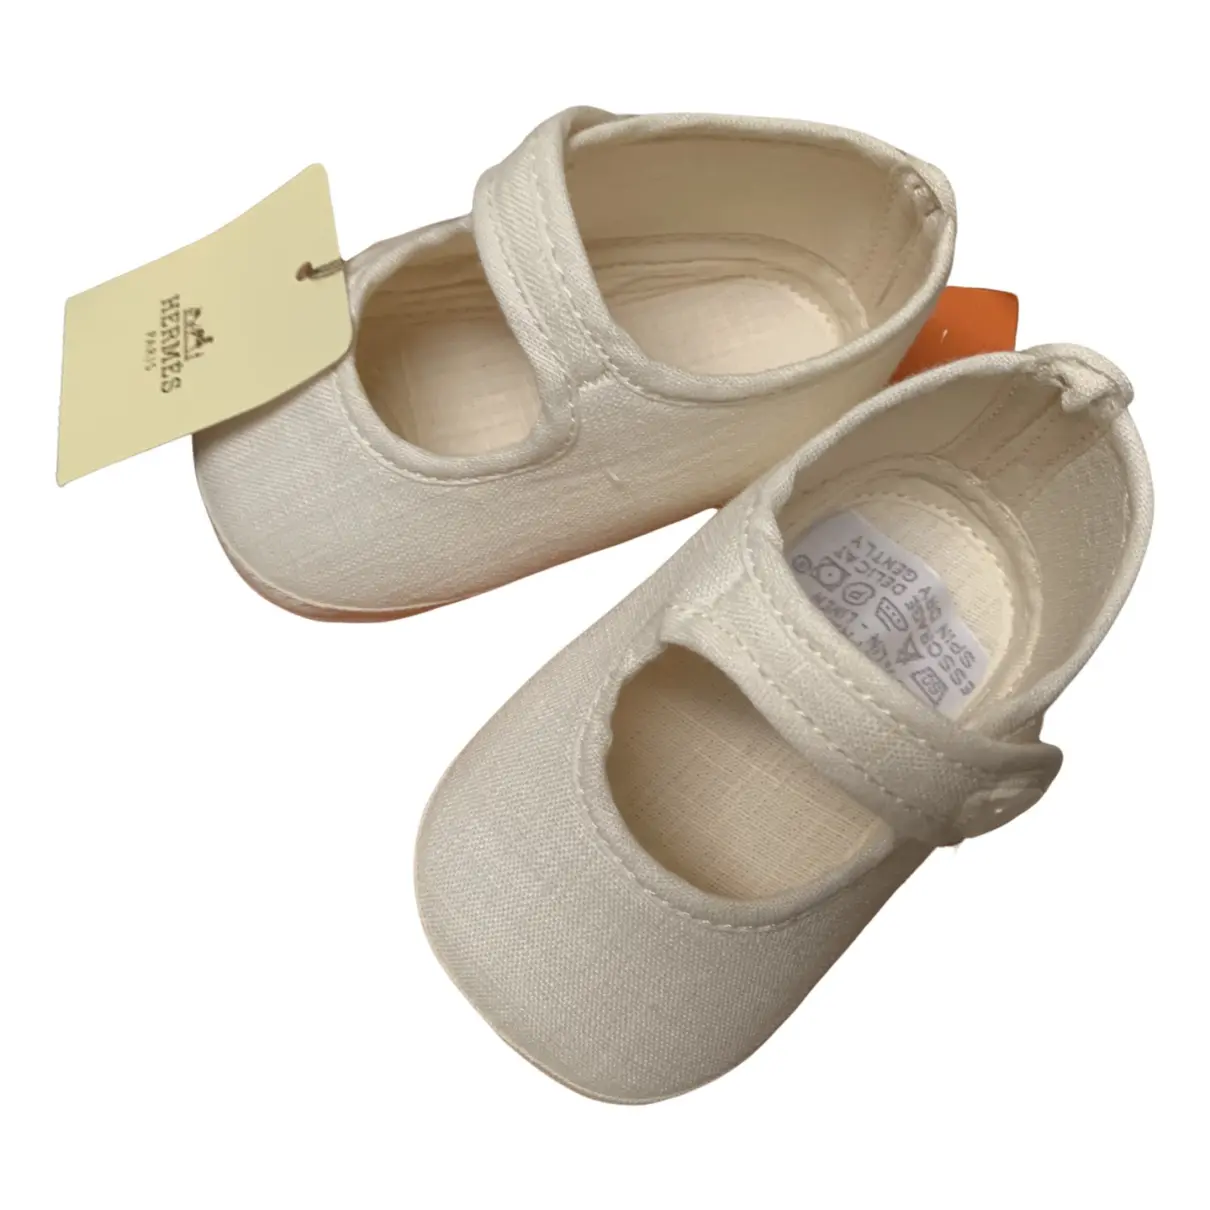 Cloth first shoes